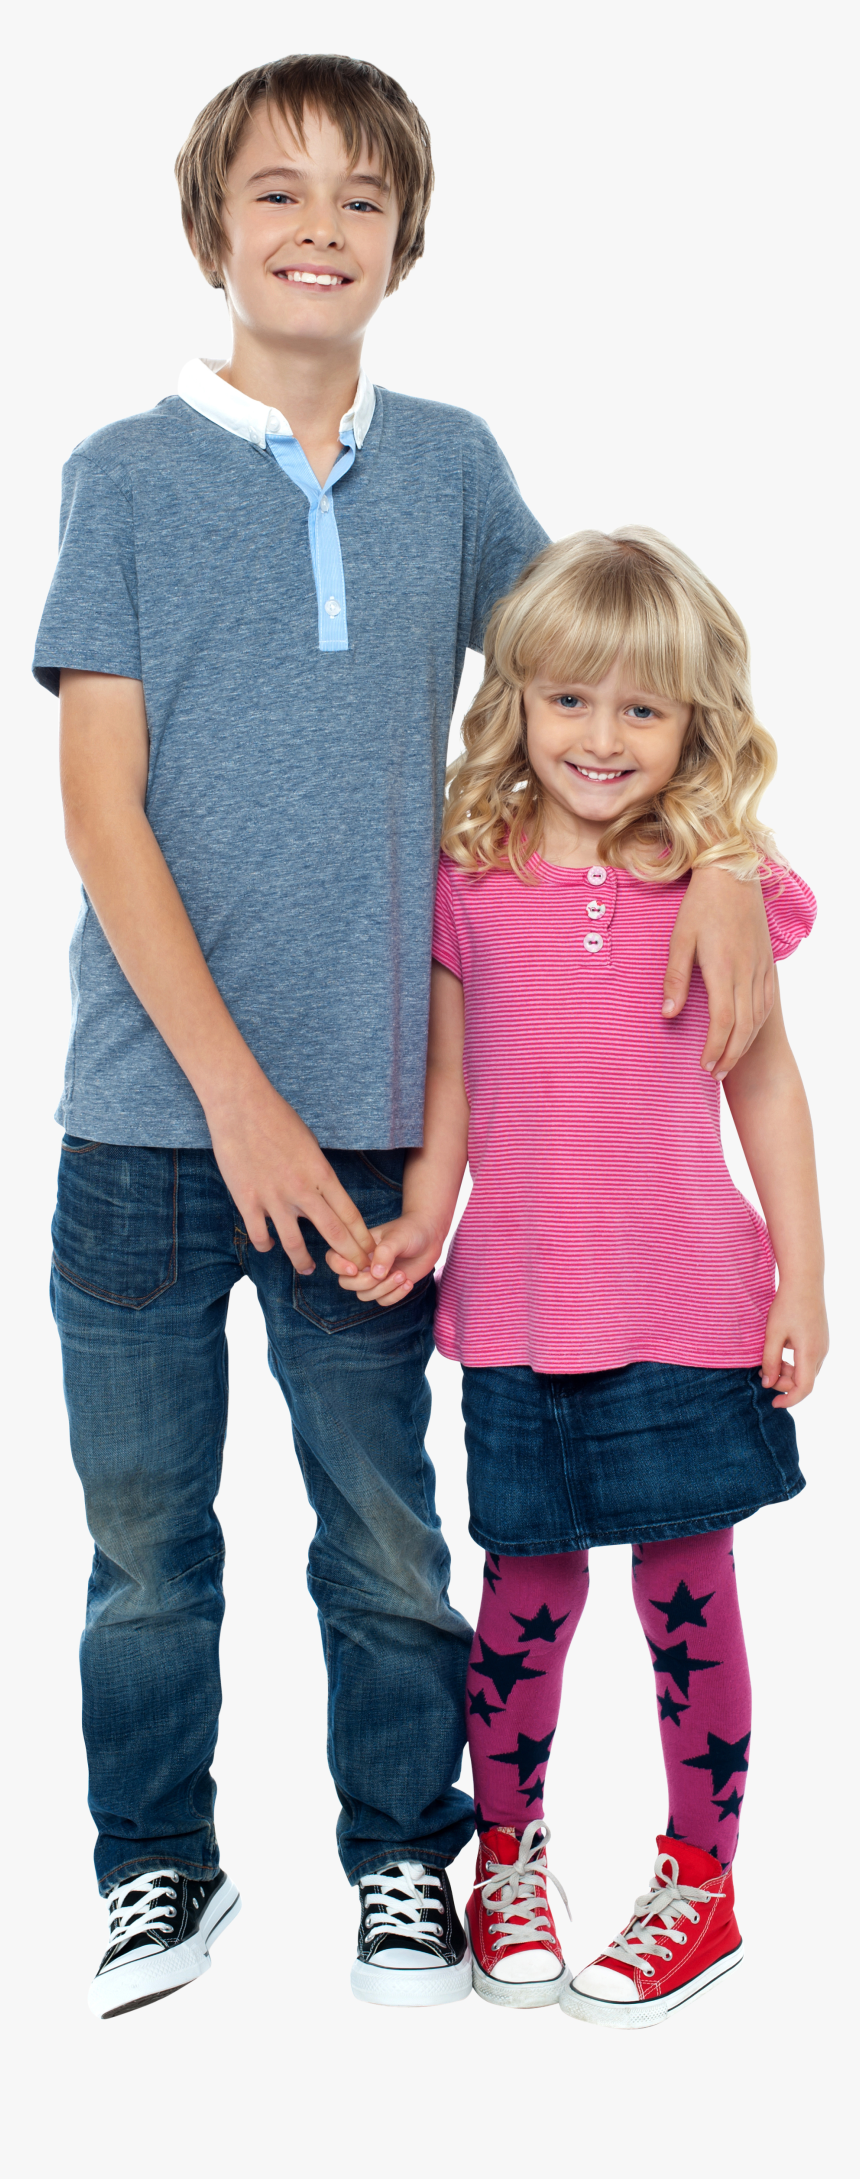 Boy And Girl Png Image - Boy And Girl Png